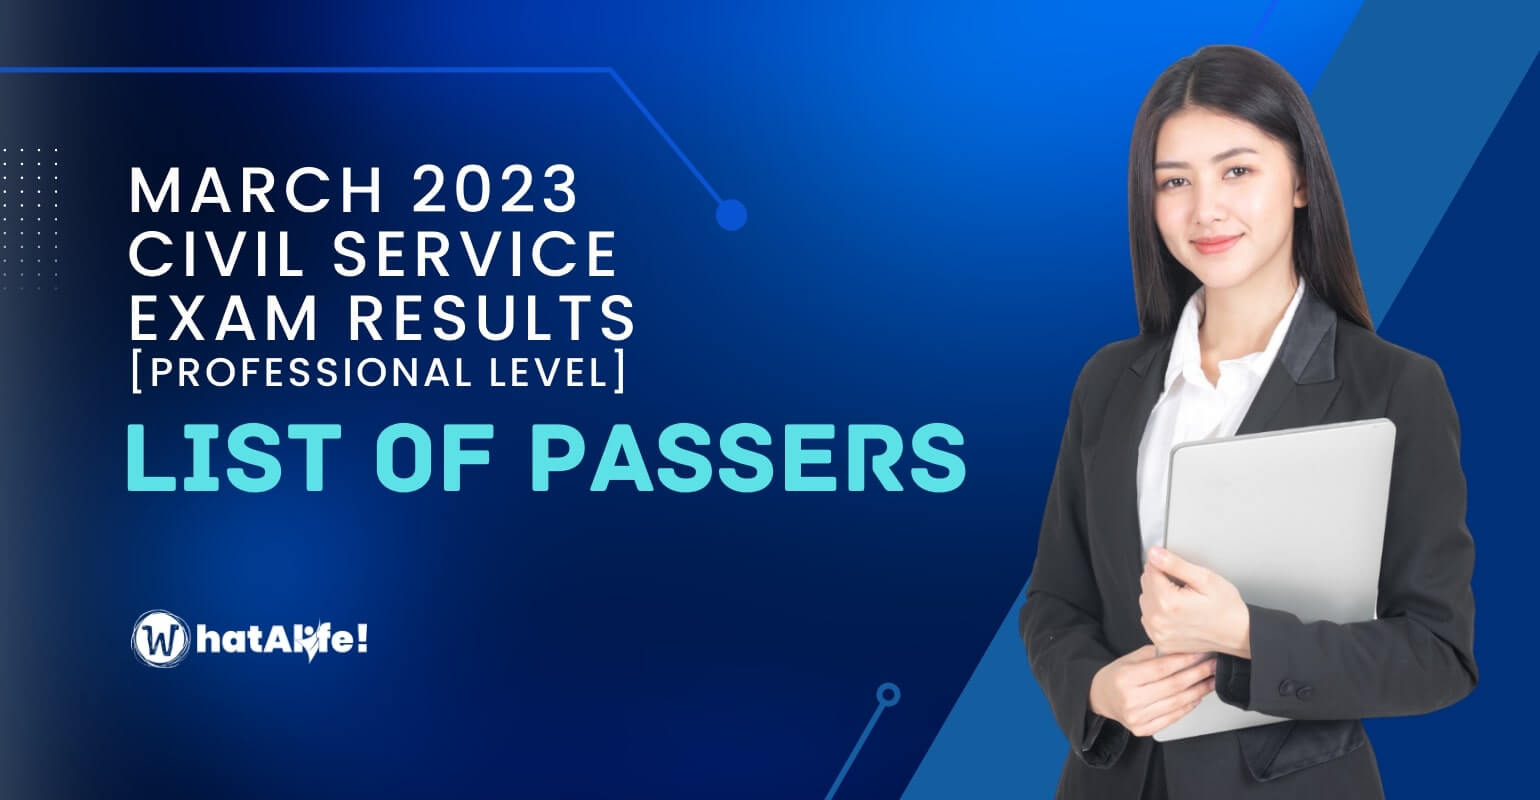 List of Passers March 2023 Civil Service Exam Results – Professional Level